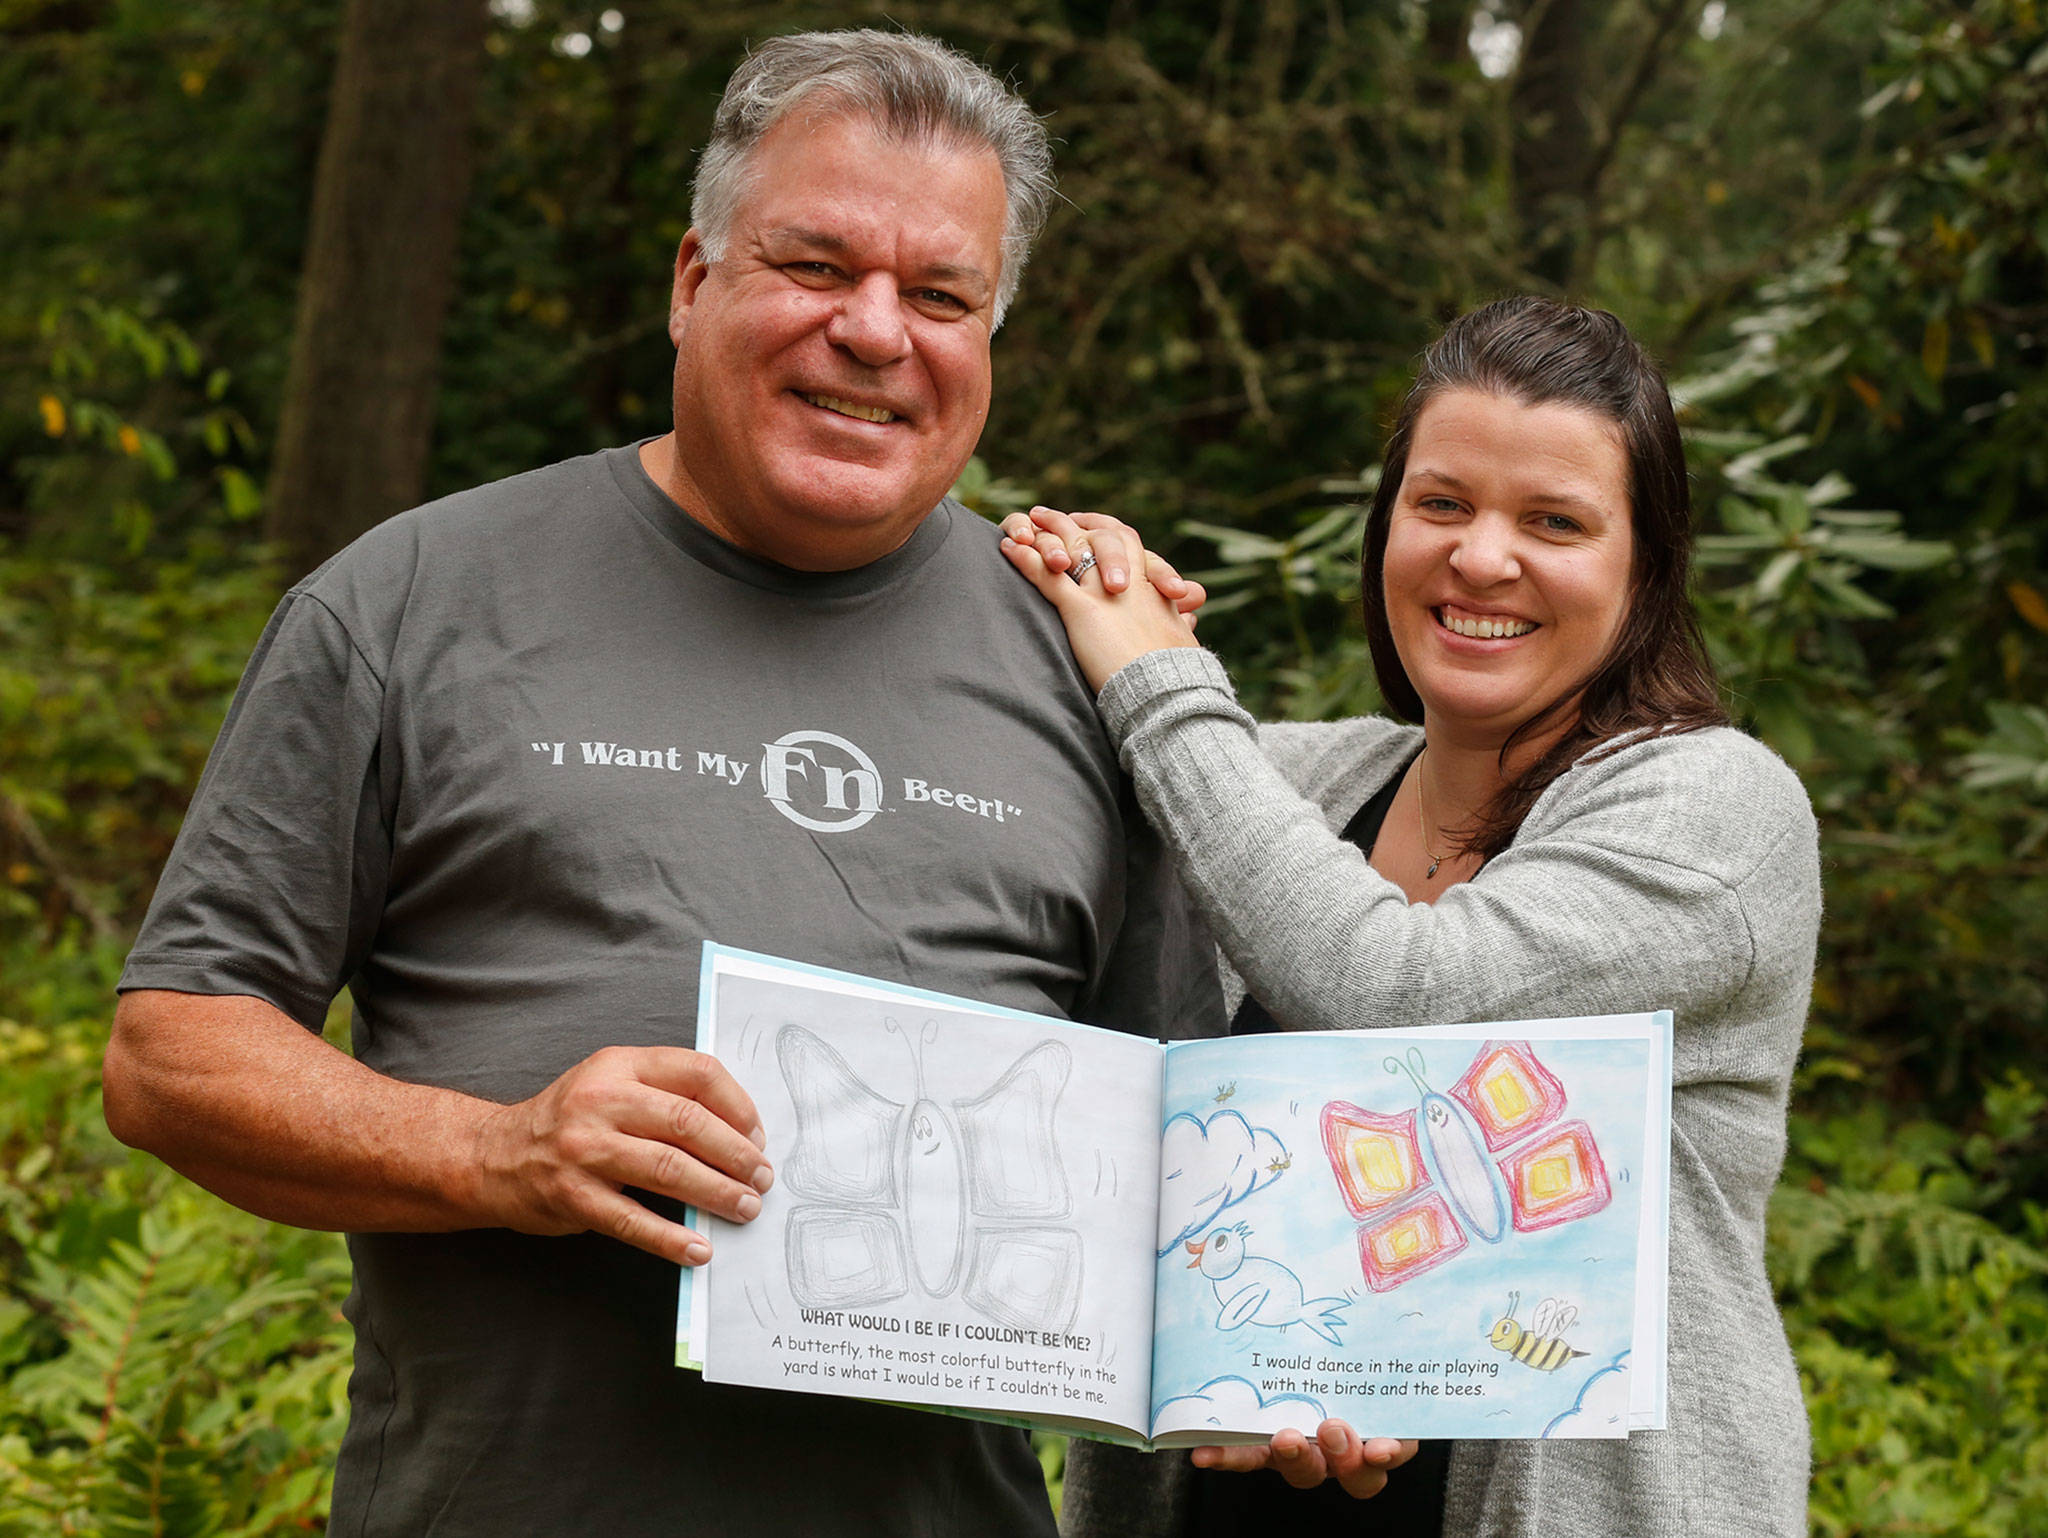 Jim Jamison and his daughter, Stephanie Schisler, wrote and illustrated “What Would I Be If I Couldn’t Be Me.” (Kevin Clark / The Herald)